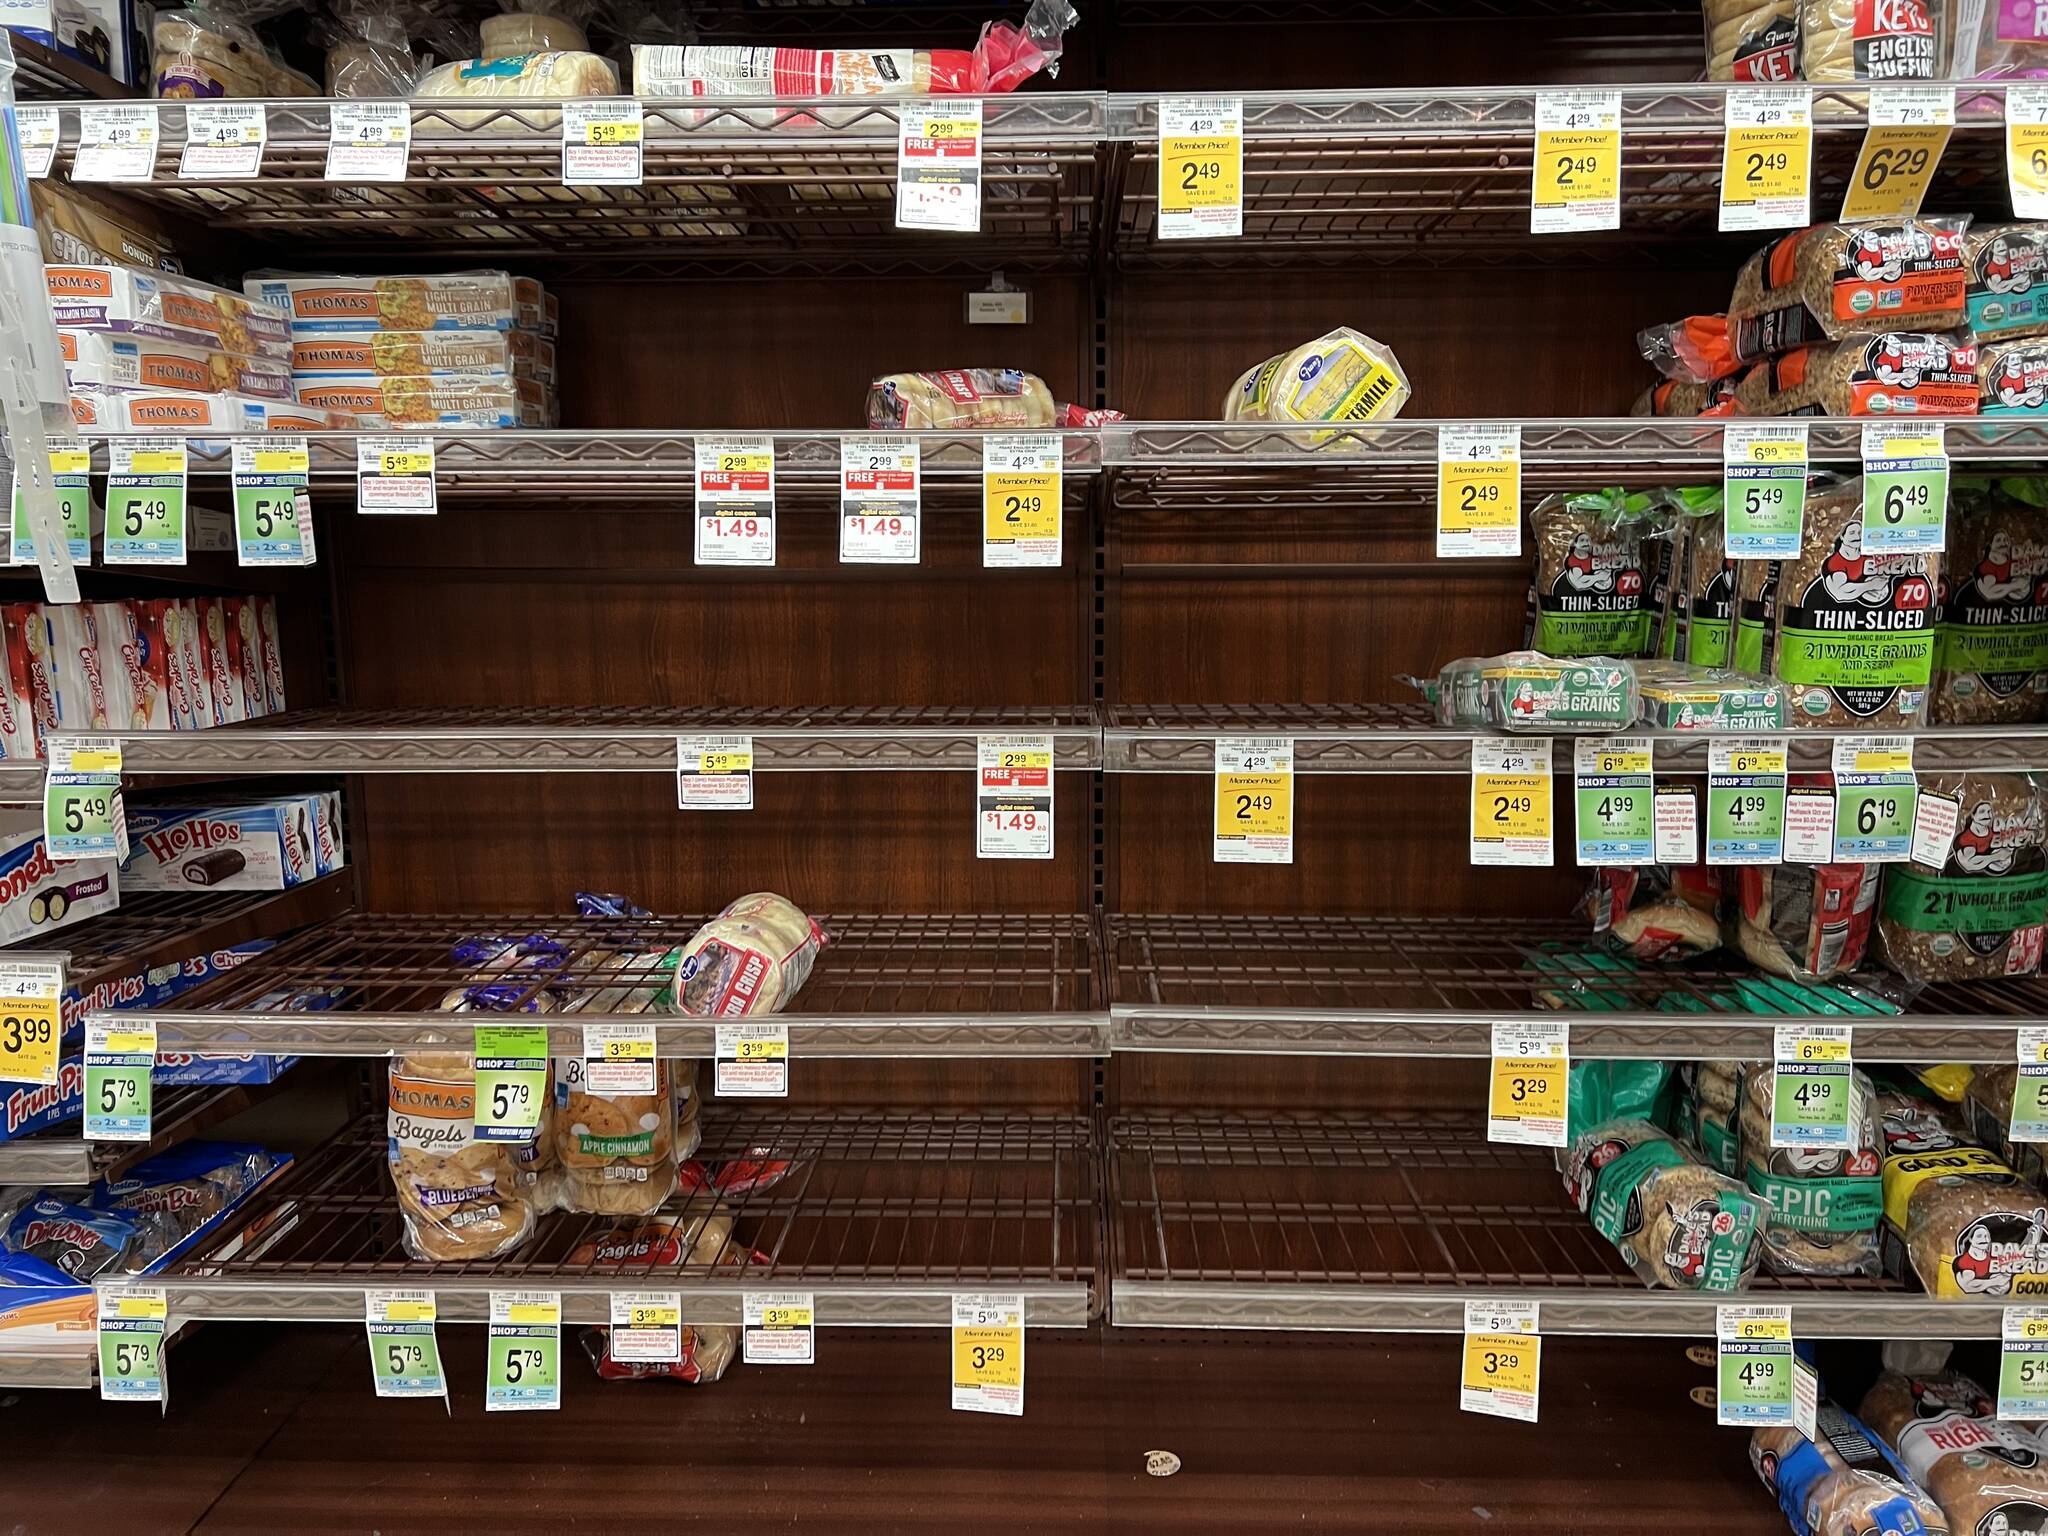 Many items in the store were quickly purchased by shoppers preparing for the storm.